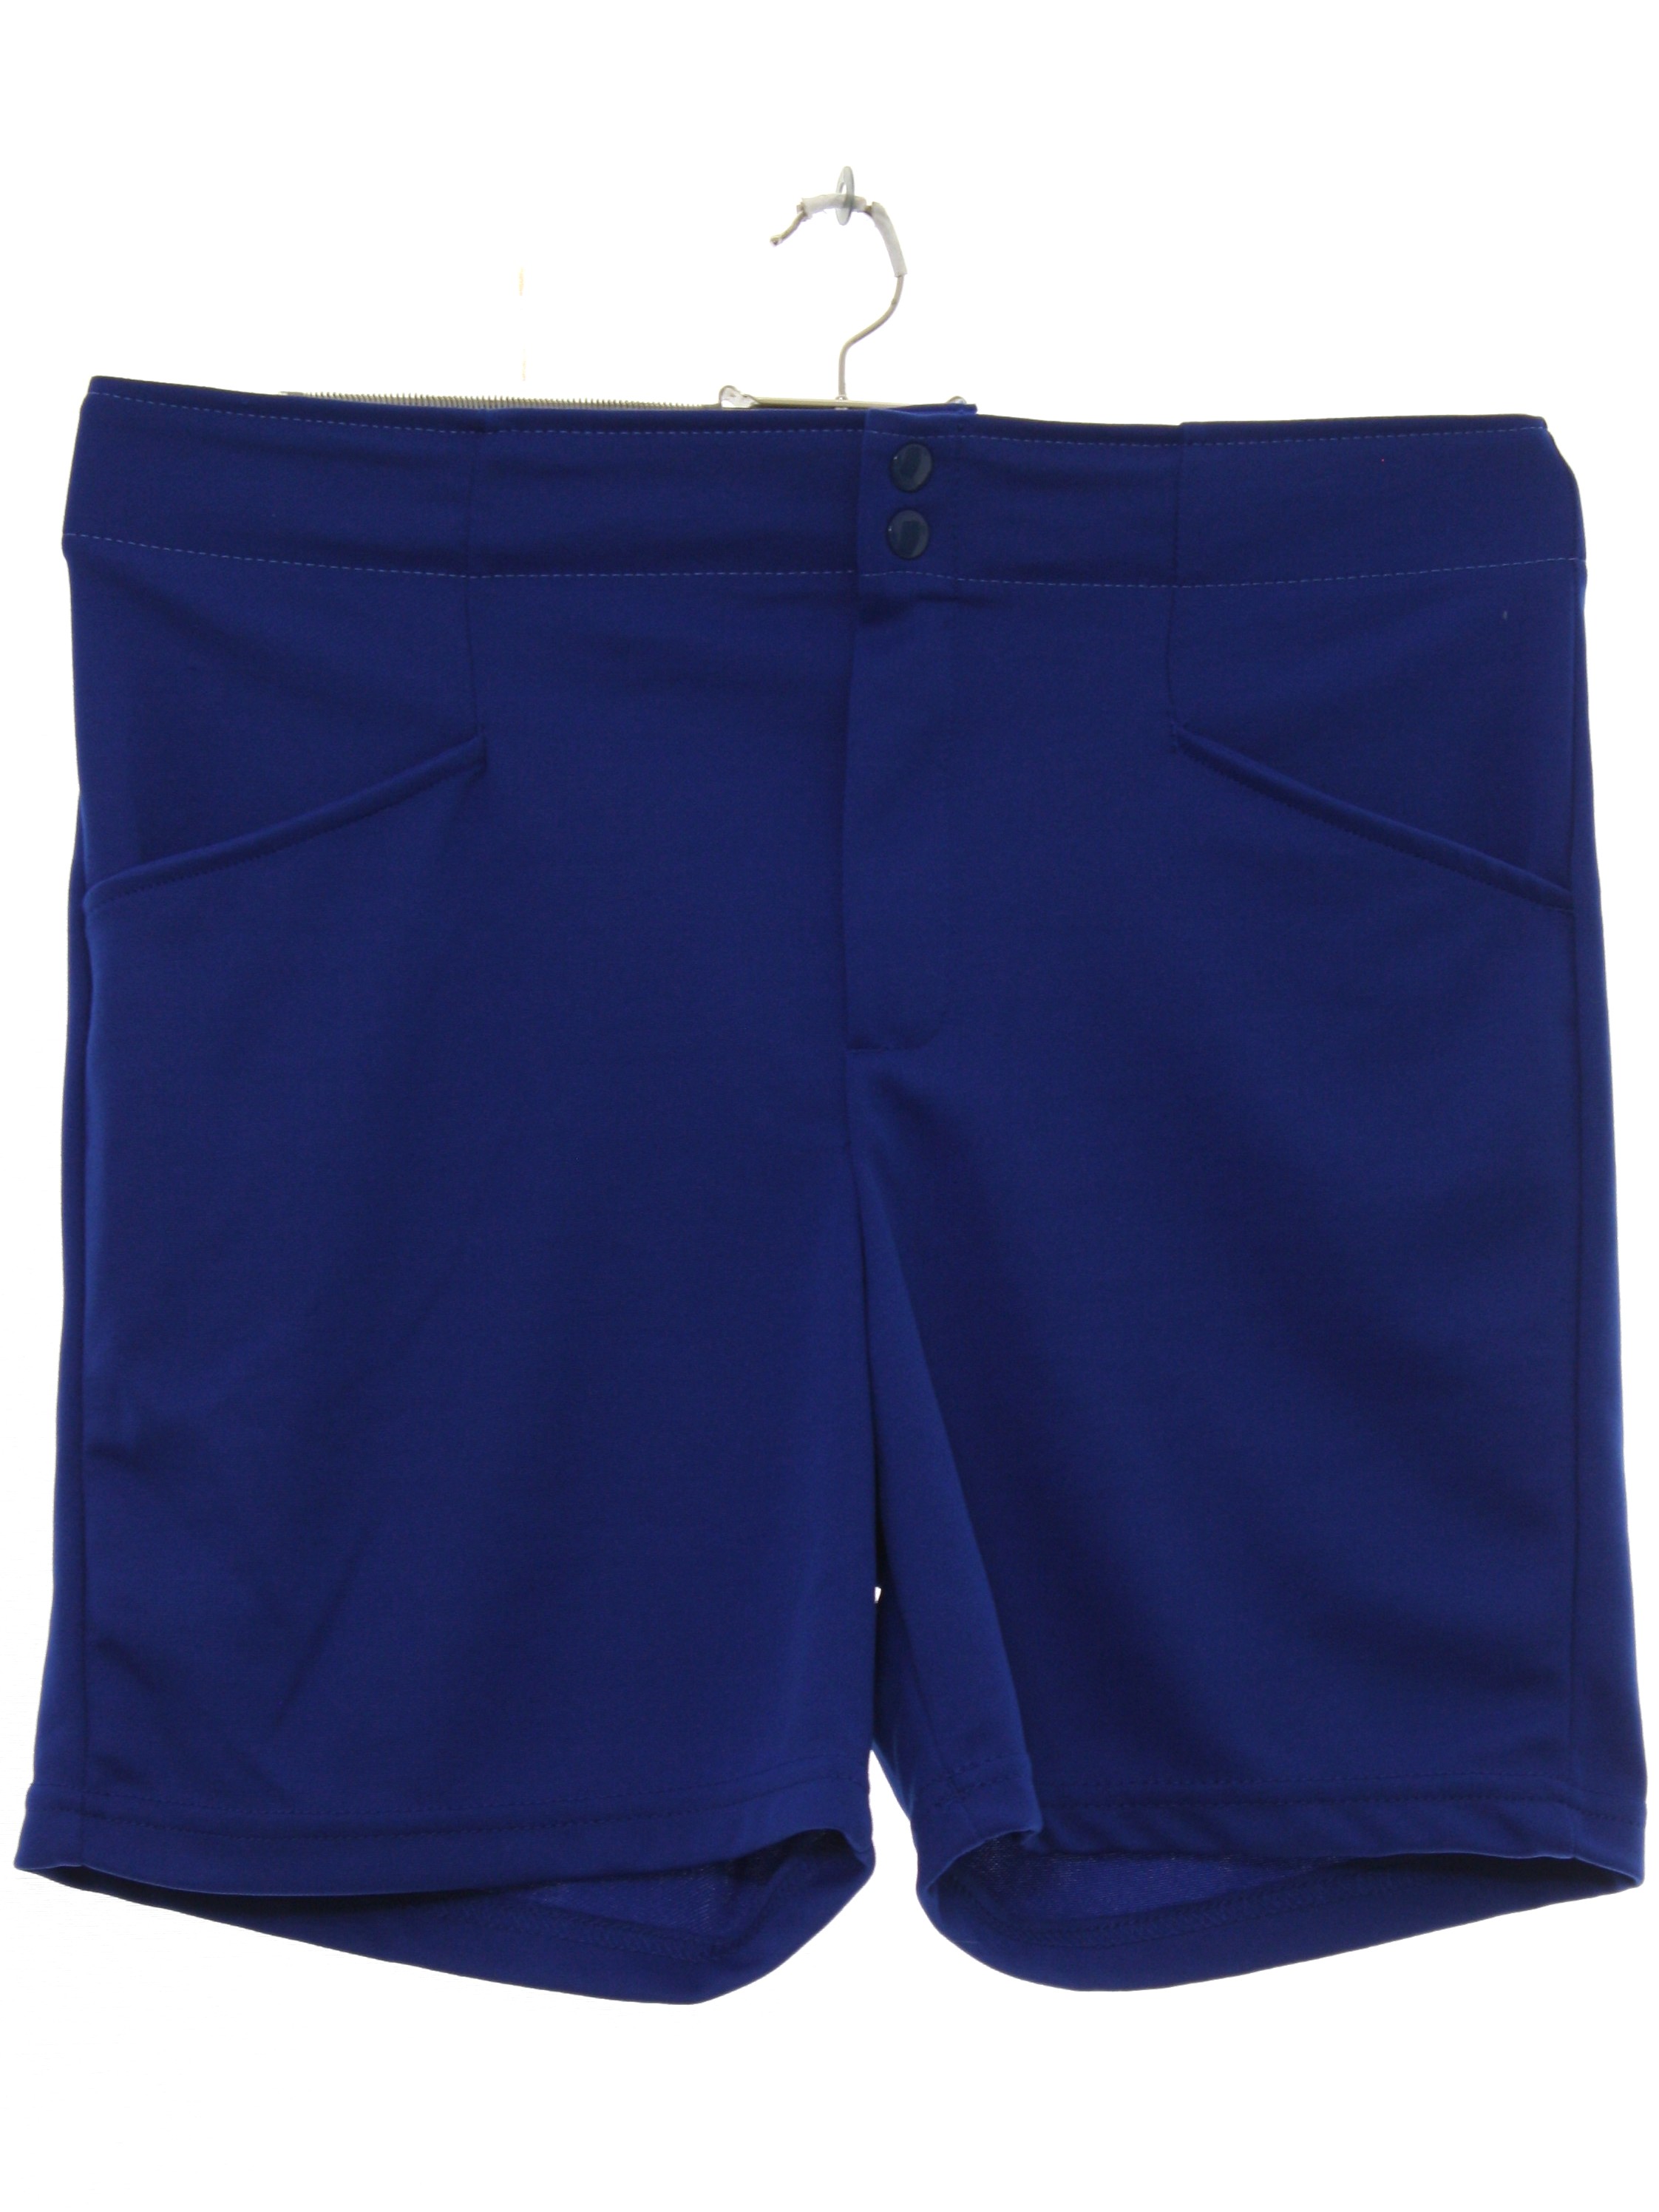 Retro 80's Shorts: Late 80s or Early 90s -Bike- Mens royal blue ...